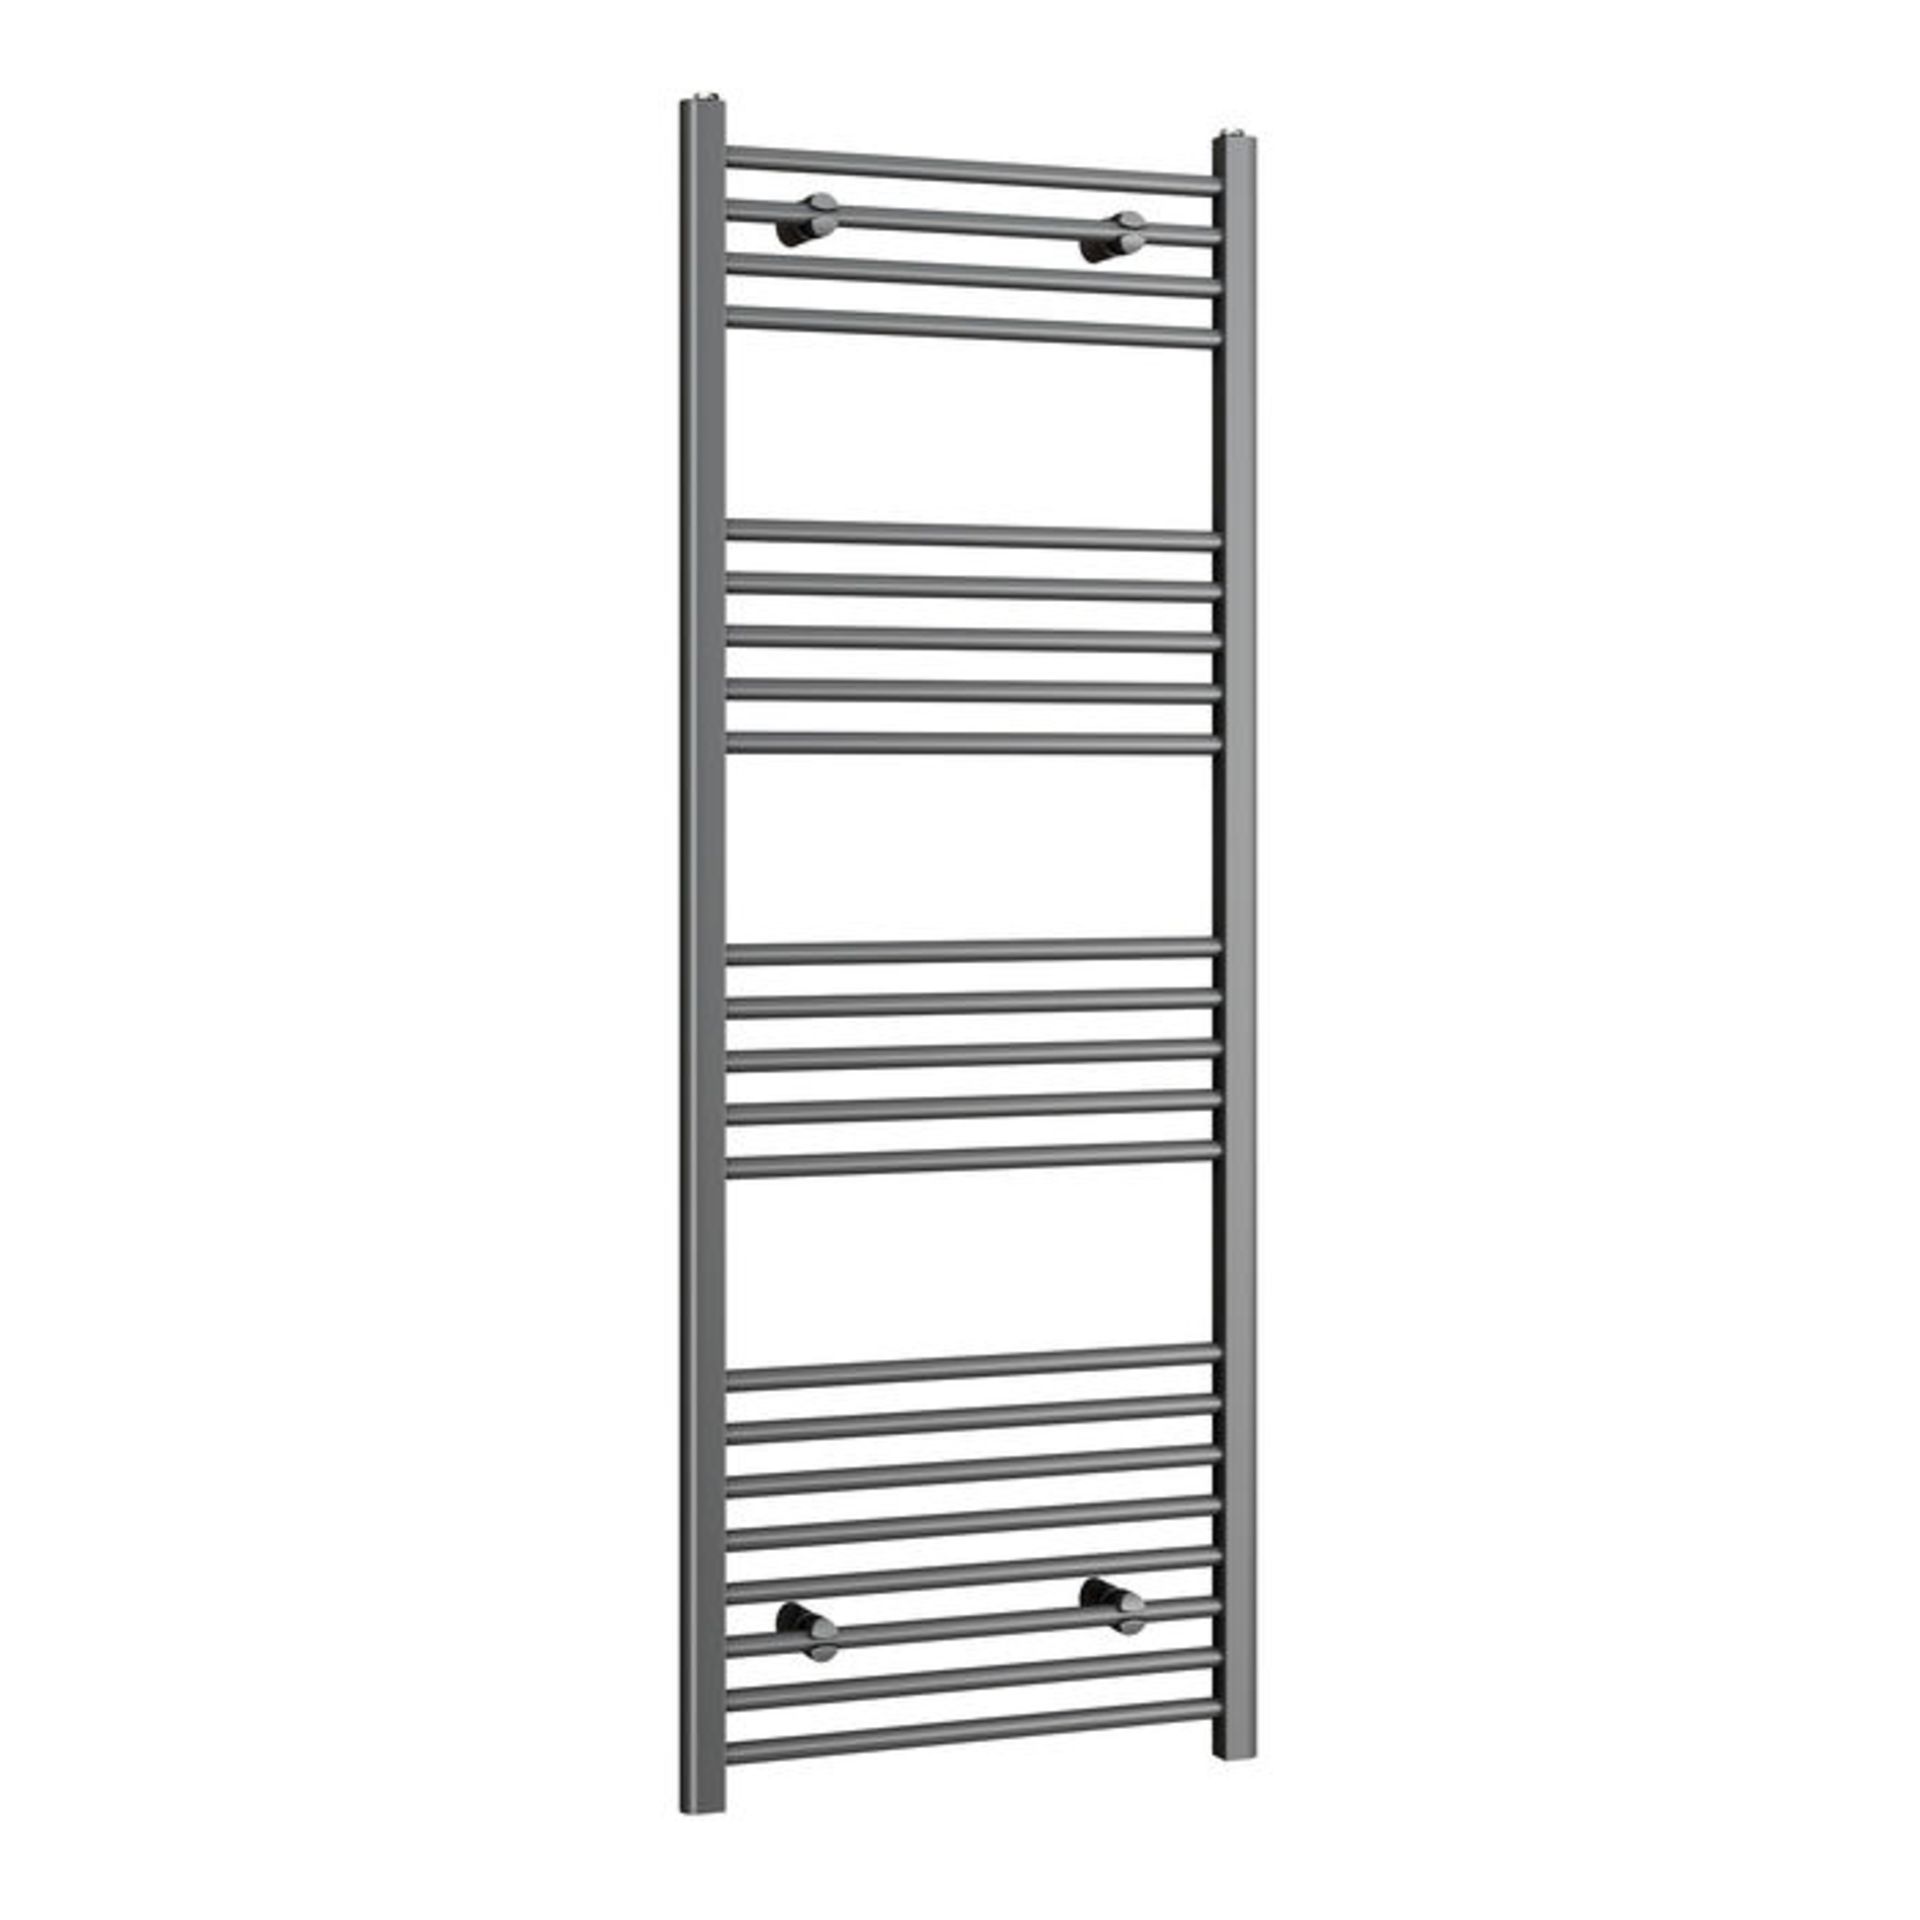 (PT56) 1600x600mm - 20mm Tubes - Anthracite Heated Straight Rail Ladder Towel Radiator. Corrosion - Image 2 of 2